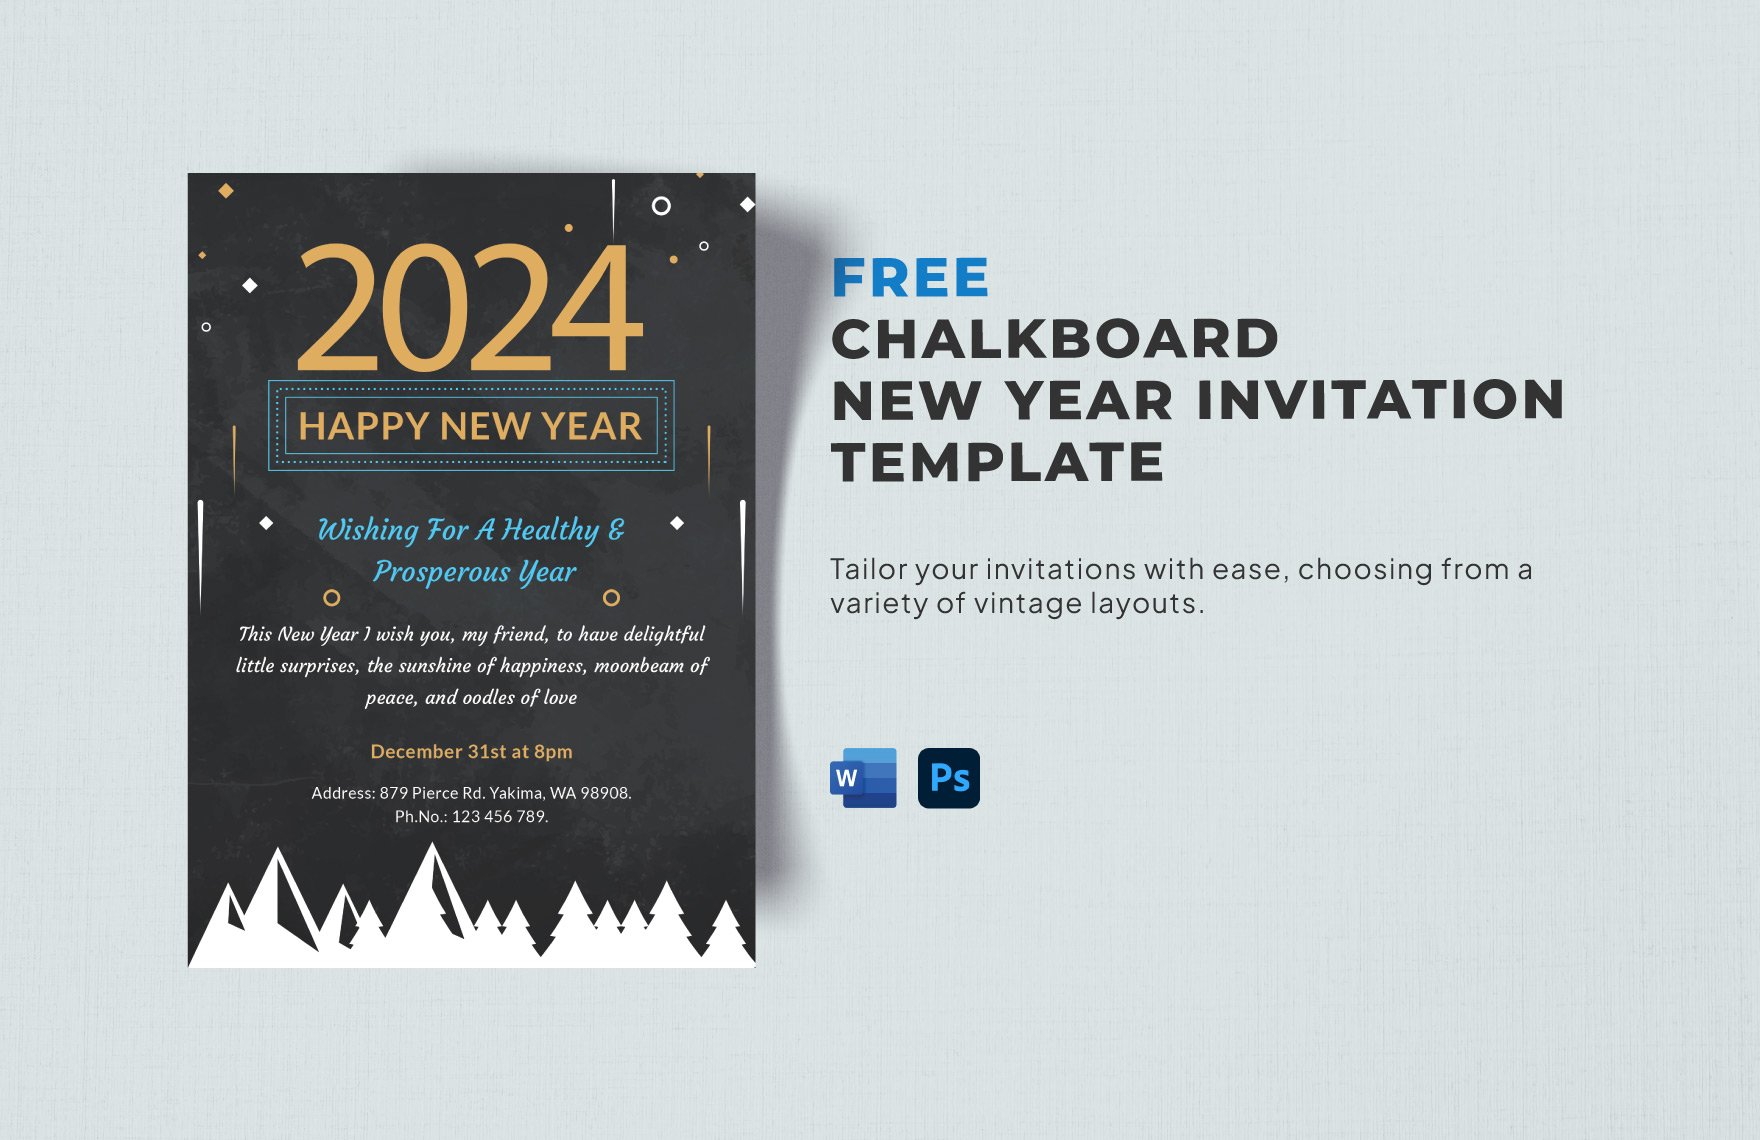 Free Chalkboard New Year Invitation Template in Word, PSD, Apple Pages